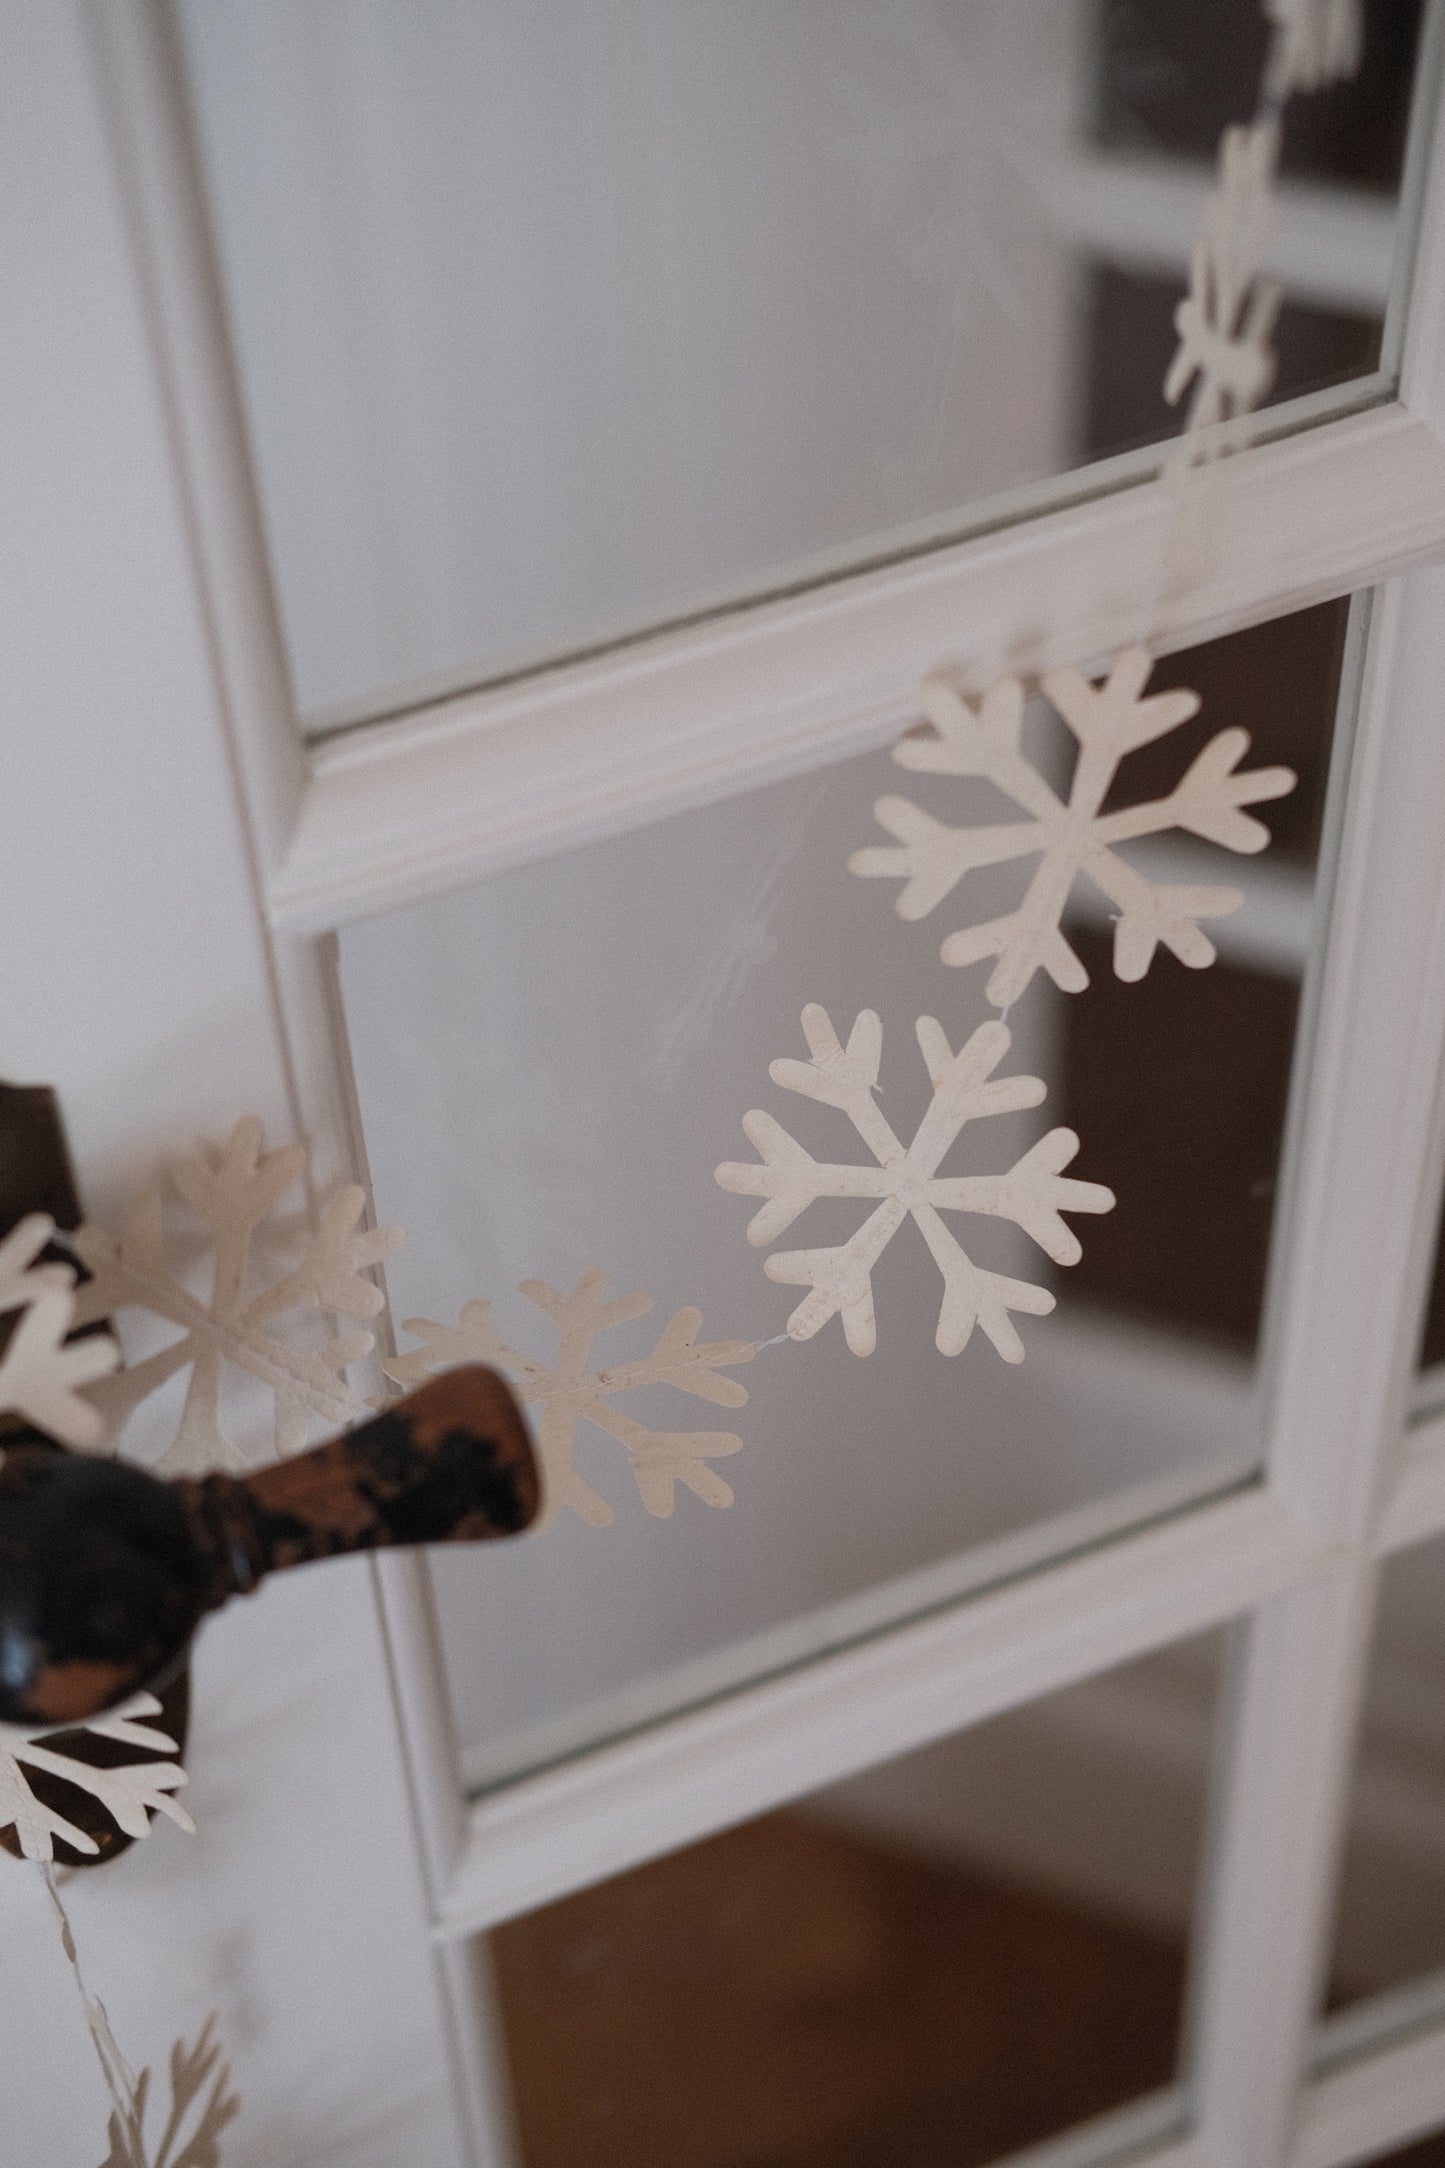 Garland • Snowflakes • White / Discontinued?